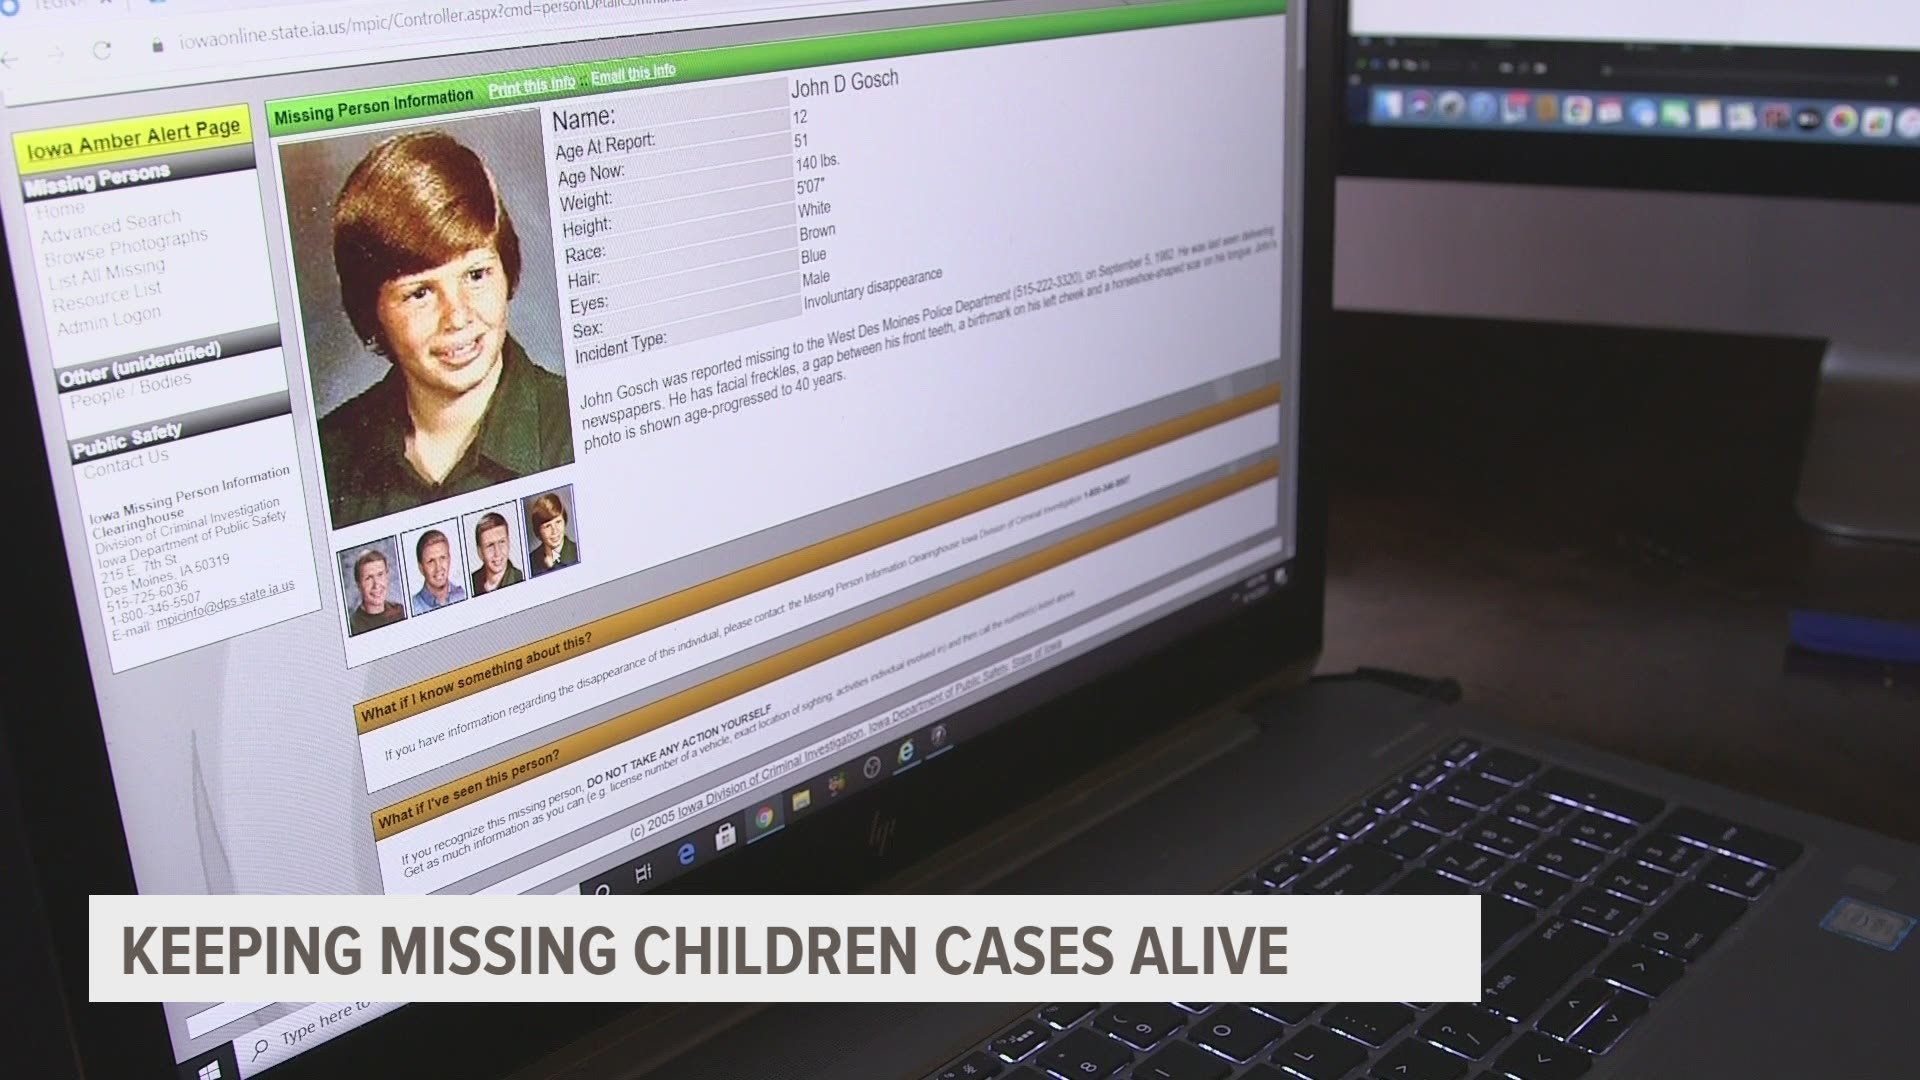 The Iowa Missing Persons Information Clearinghouse plays a big part in keeping track of missing person cases in Iowa. Here's how they do it.